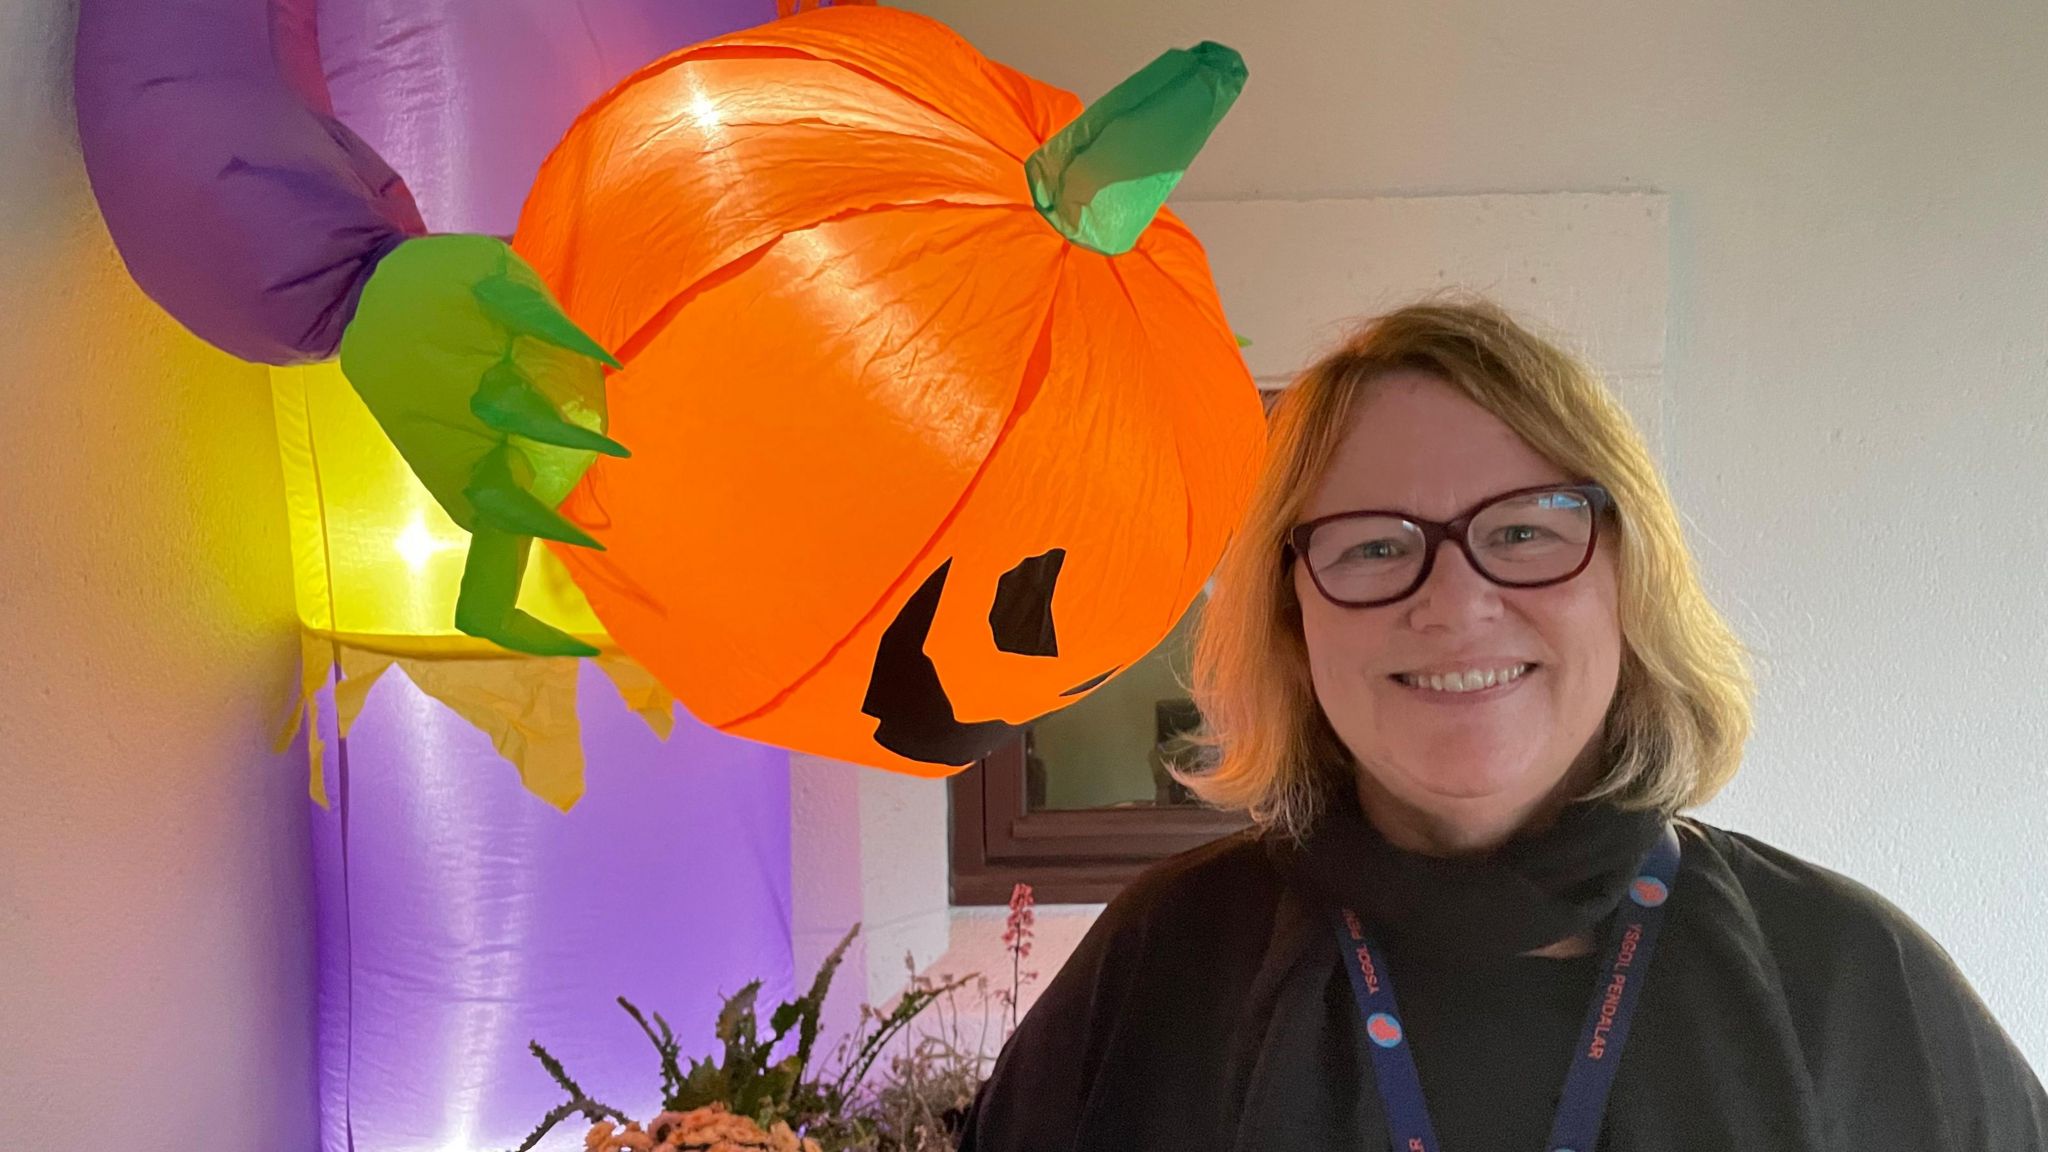 Bethan Morris Jones stood in from of halloween decorations, including a large orange inflated pumpkin head